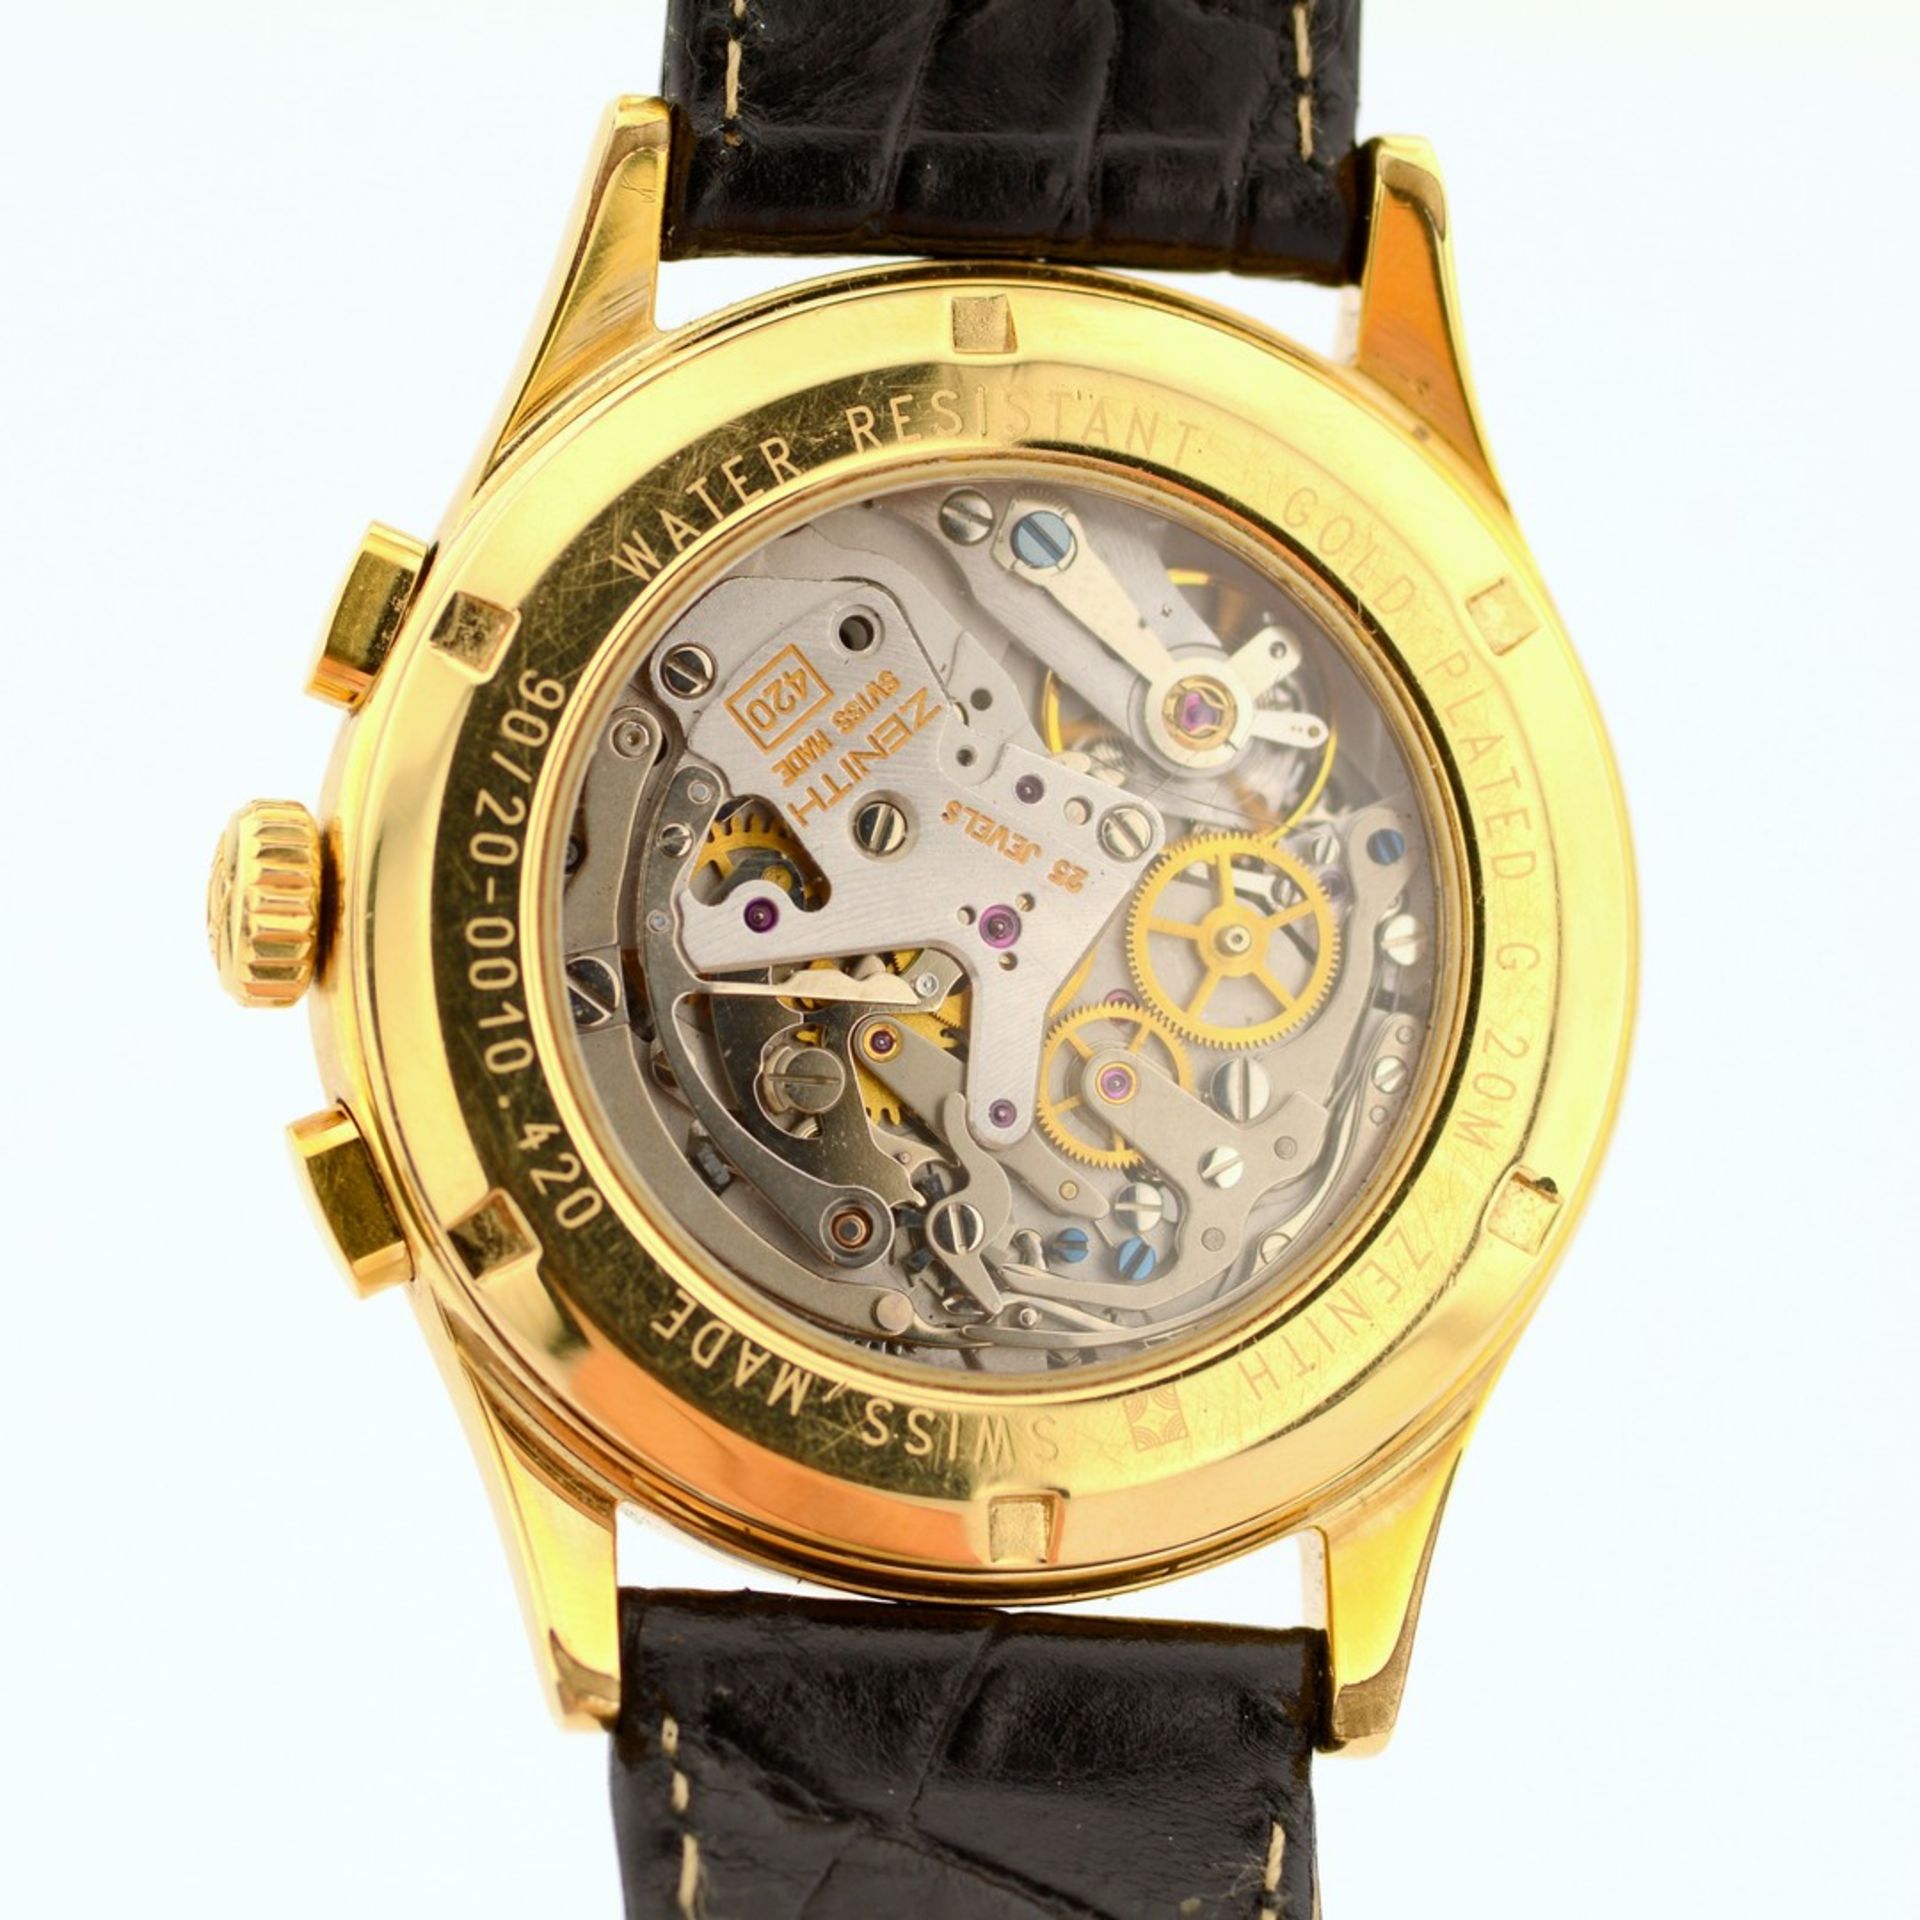 Zenith / Prime Chronograph - Gentlemen's Gold-plated Wristwatch - Image 5 of 8